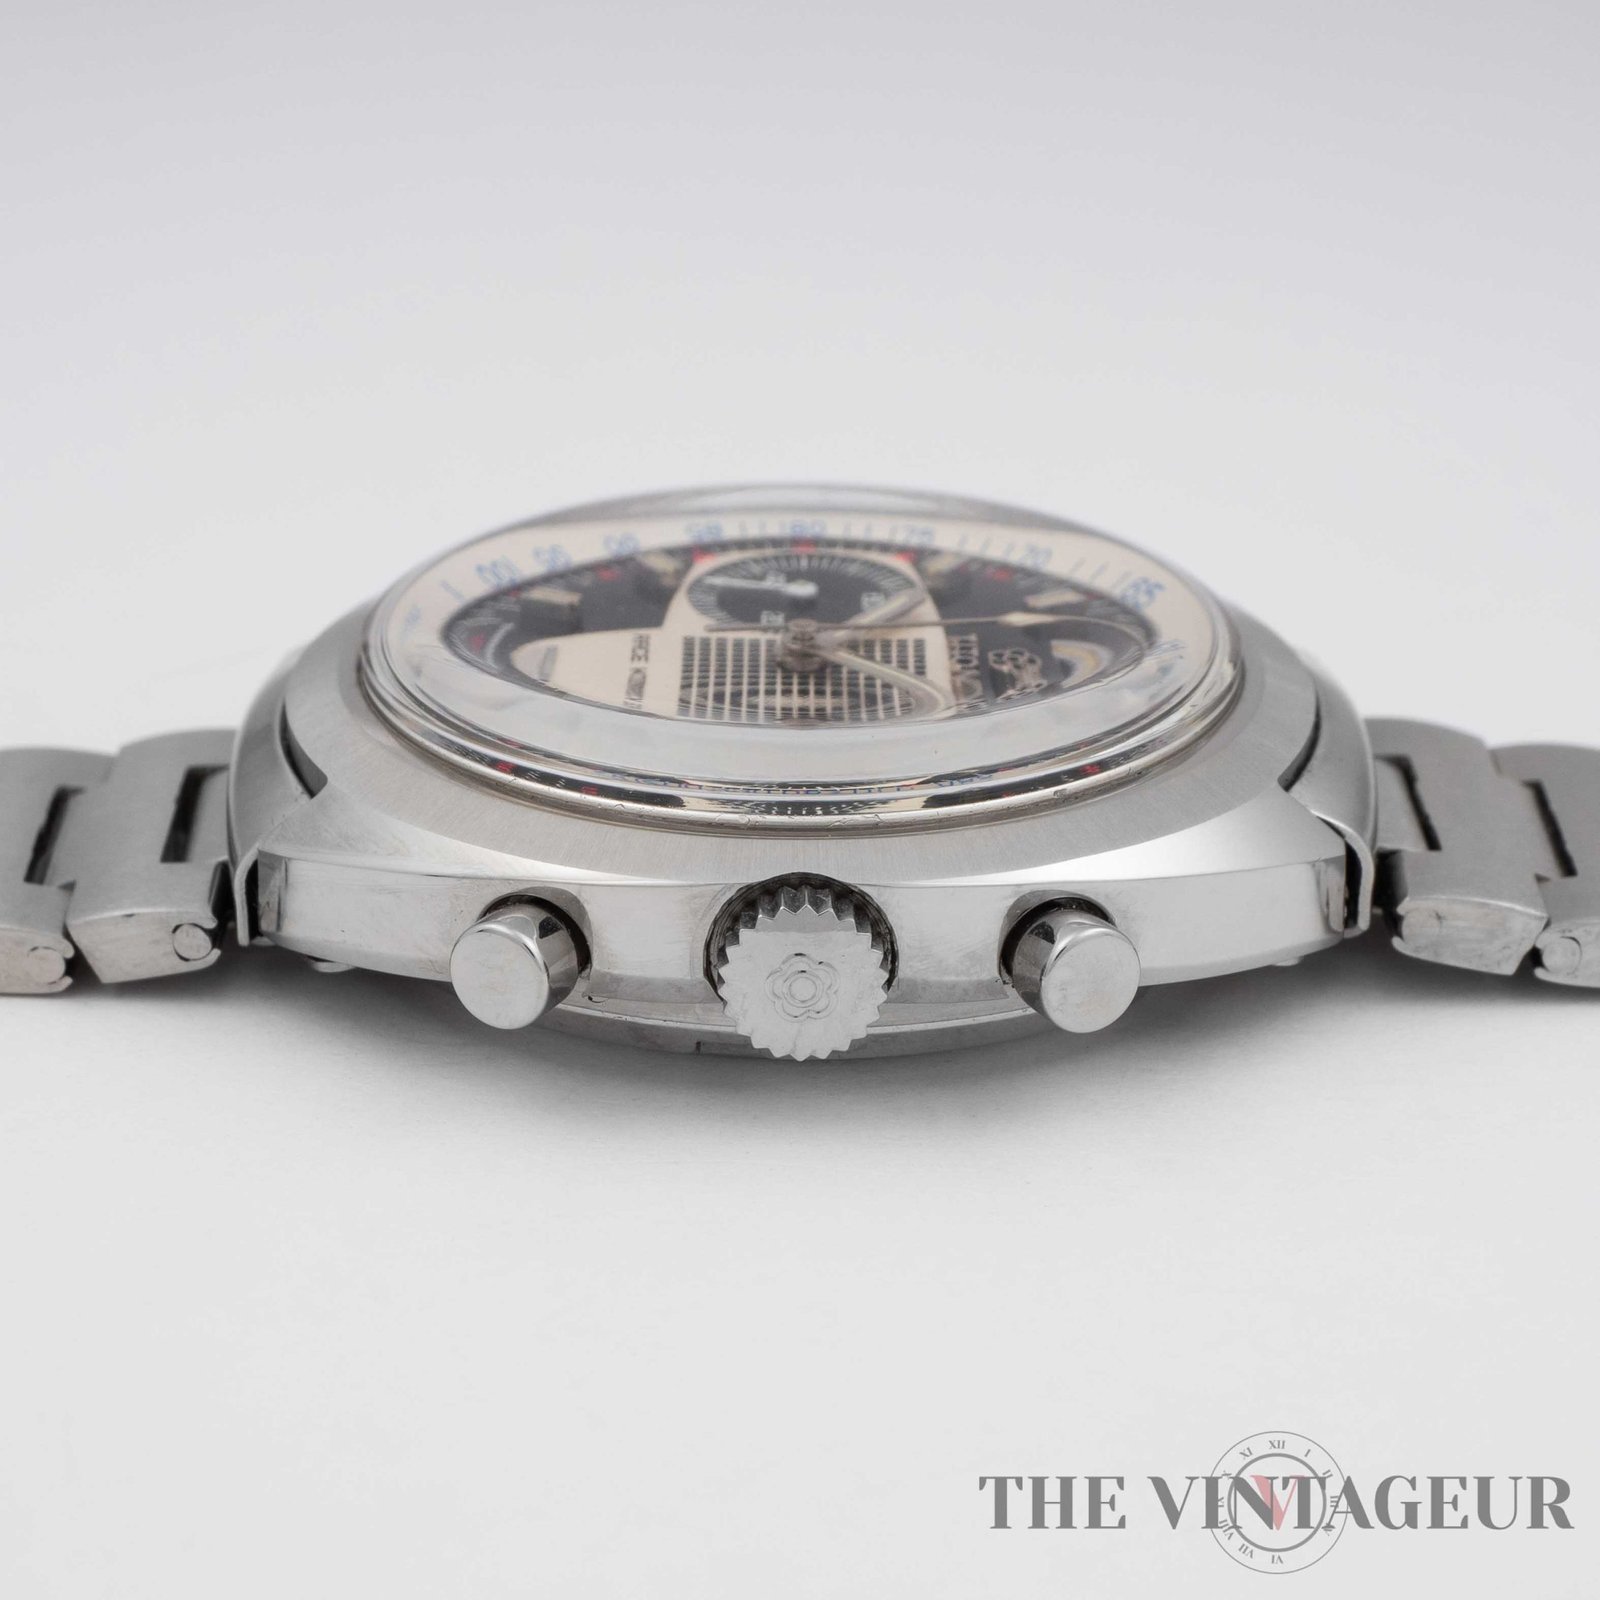 Titoni 2 – Race King - The Vintageur - Your bespoke watches collection - Collectible watch and watches and more